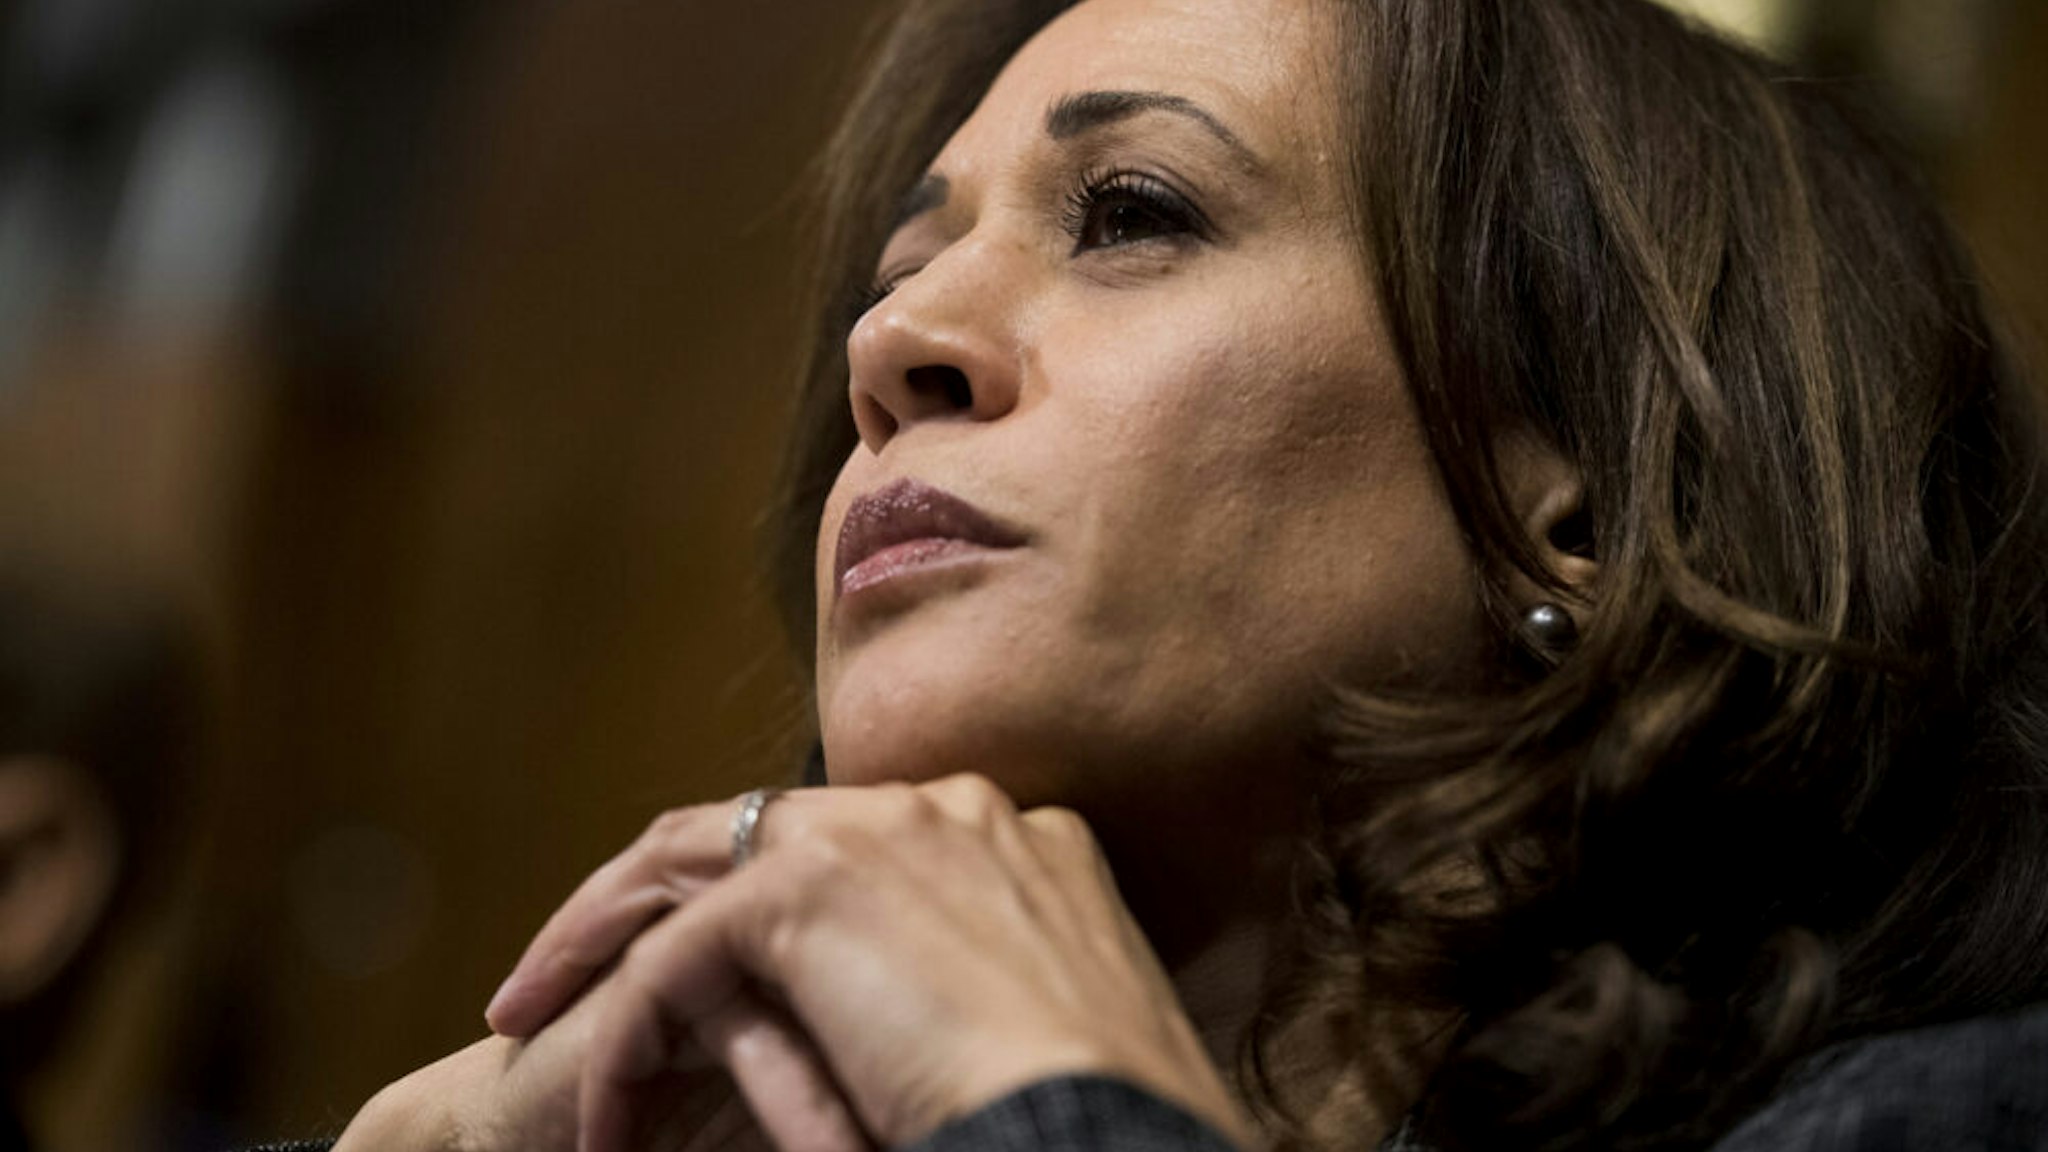 Sen. Kamala Harris, D-Calif., listens to Christine Blasey Ford testify during the Senate Judiciary Committee hearing on the nomination of Brett M. Kavanaugh to be an associate justice of the Supreme Court of the United States, on Capitol Hill September 27, 2018 in Washington, DC. A professor at Palo Alto University and a research psychologist at the Stanford University School of Medicine, Ford has accused Supreme Court nominee Judge Brett Kavanaugh of sexually assaulting her during a party in 1982 when they were high school students in suburban Maryland.